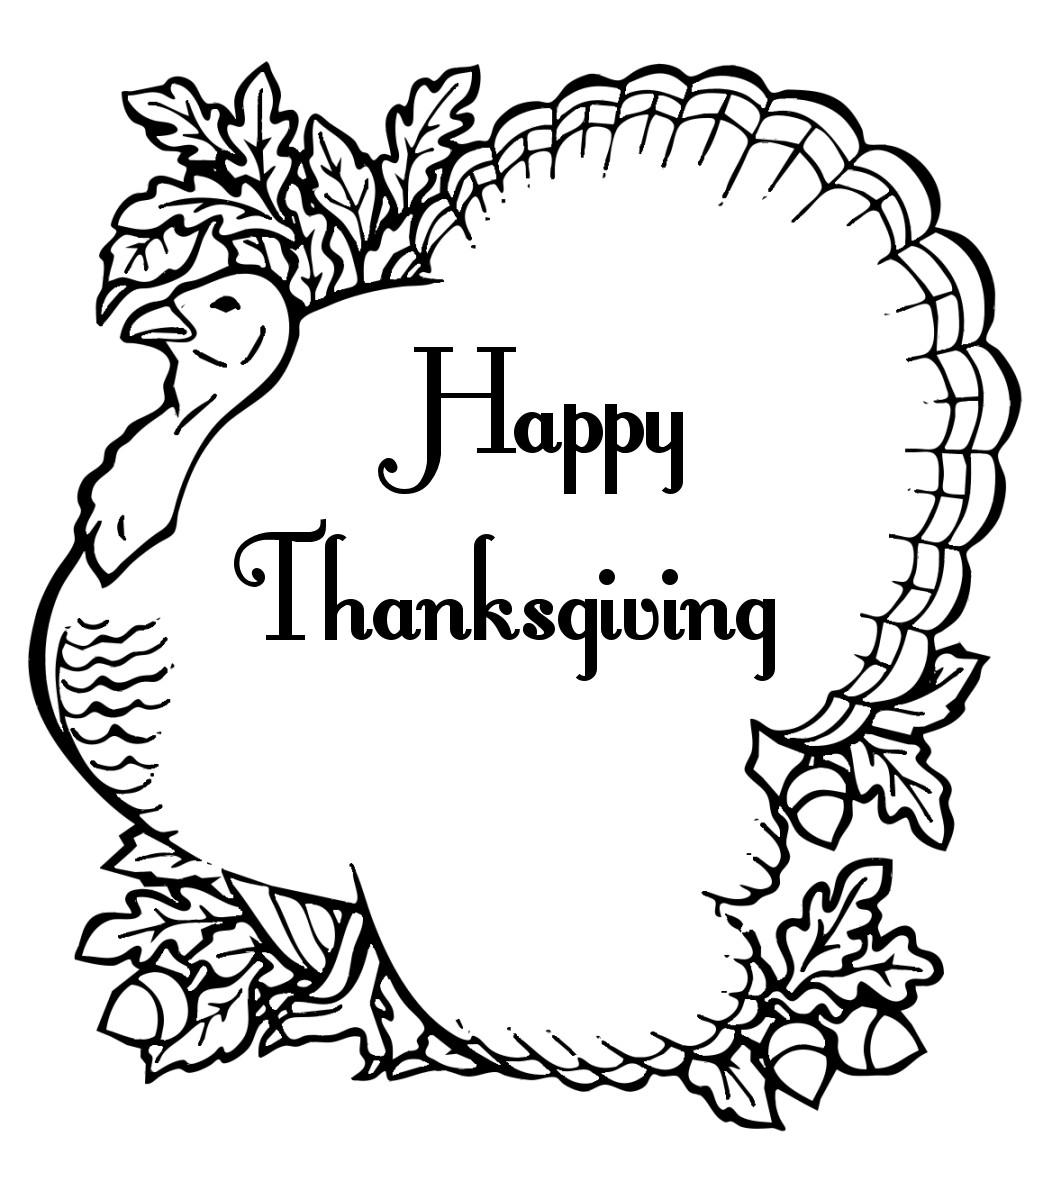 Thanksgiving Turkey Clipart Black And White
 Best Turkey Clipart Black And White 1516 Clipartion